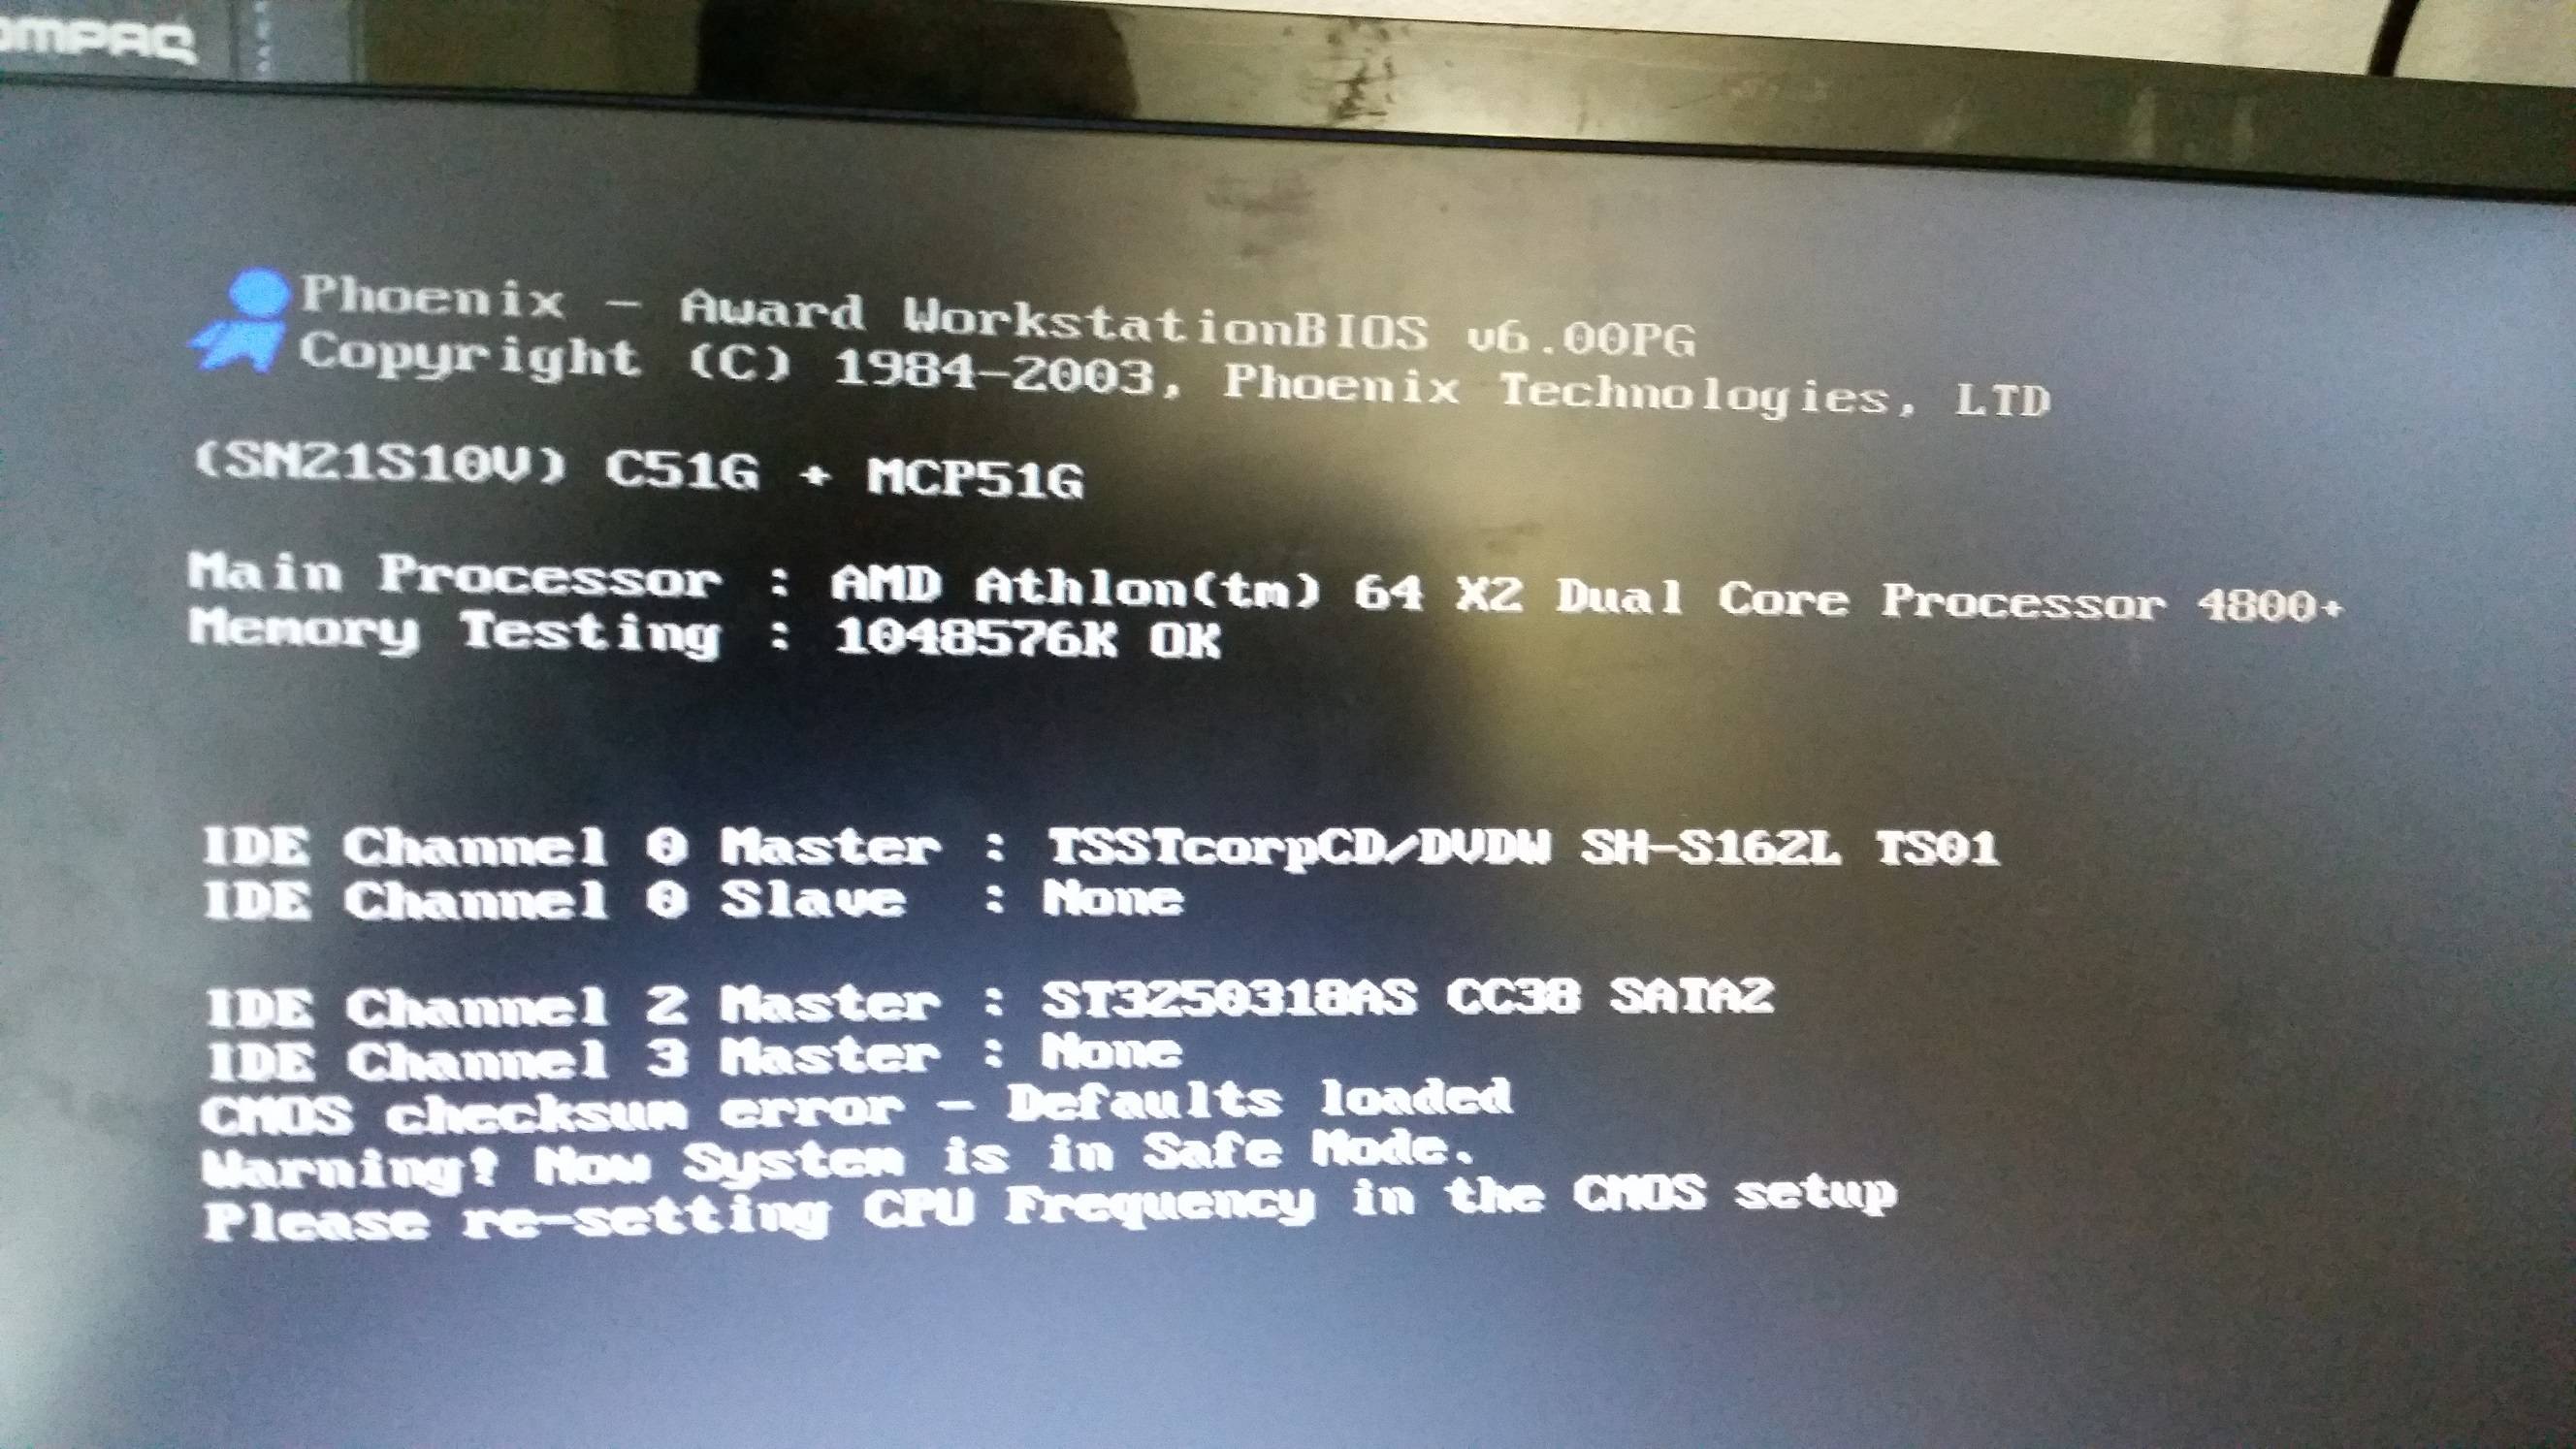 "Warning! Now system is in safe mode. Please re-setting CPU frequency in CMOS setup" black screen error